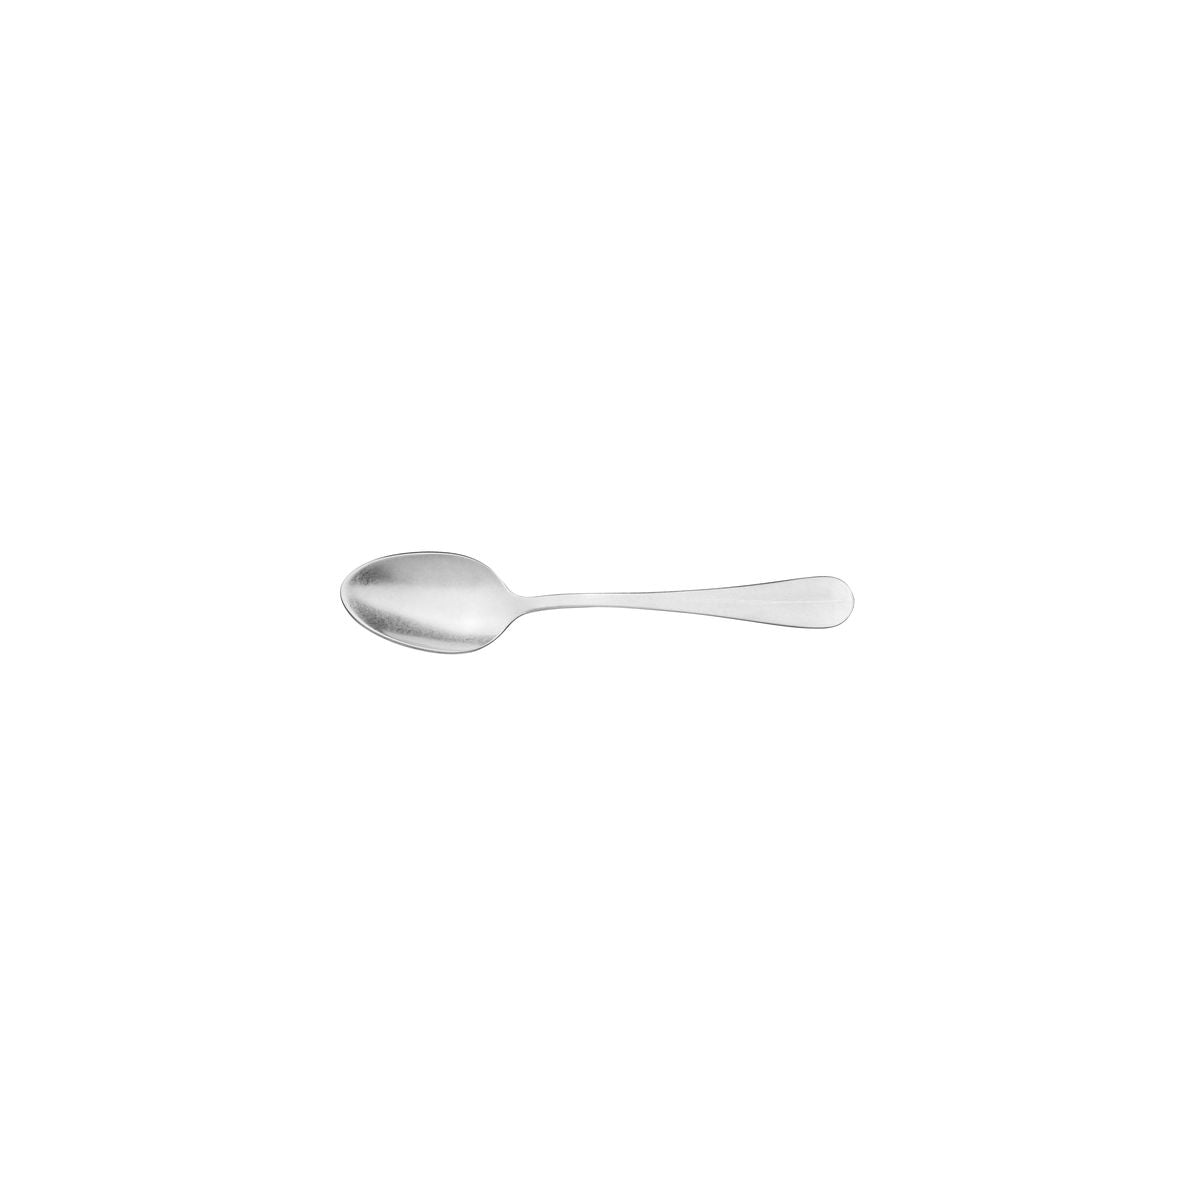 Coffee Spoon - Vintage Baguette from Abert. Satin Finish, made out of Stainless Steel and sold in boxes of 12. Hospitality quality at wholesale price with The Flying Fork! 